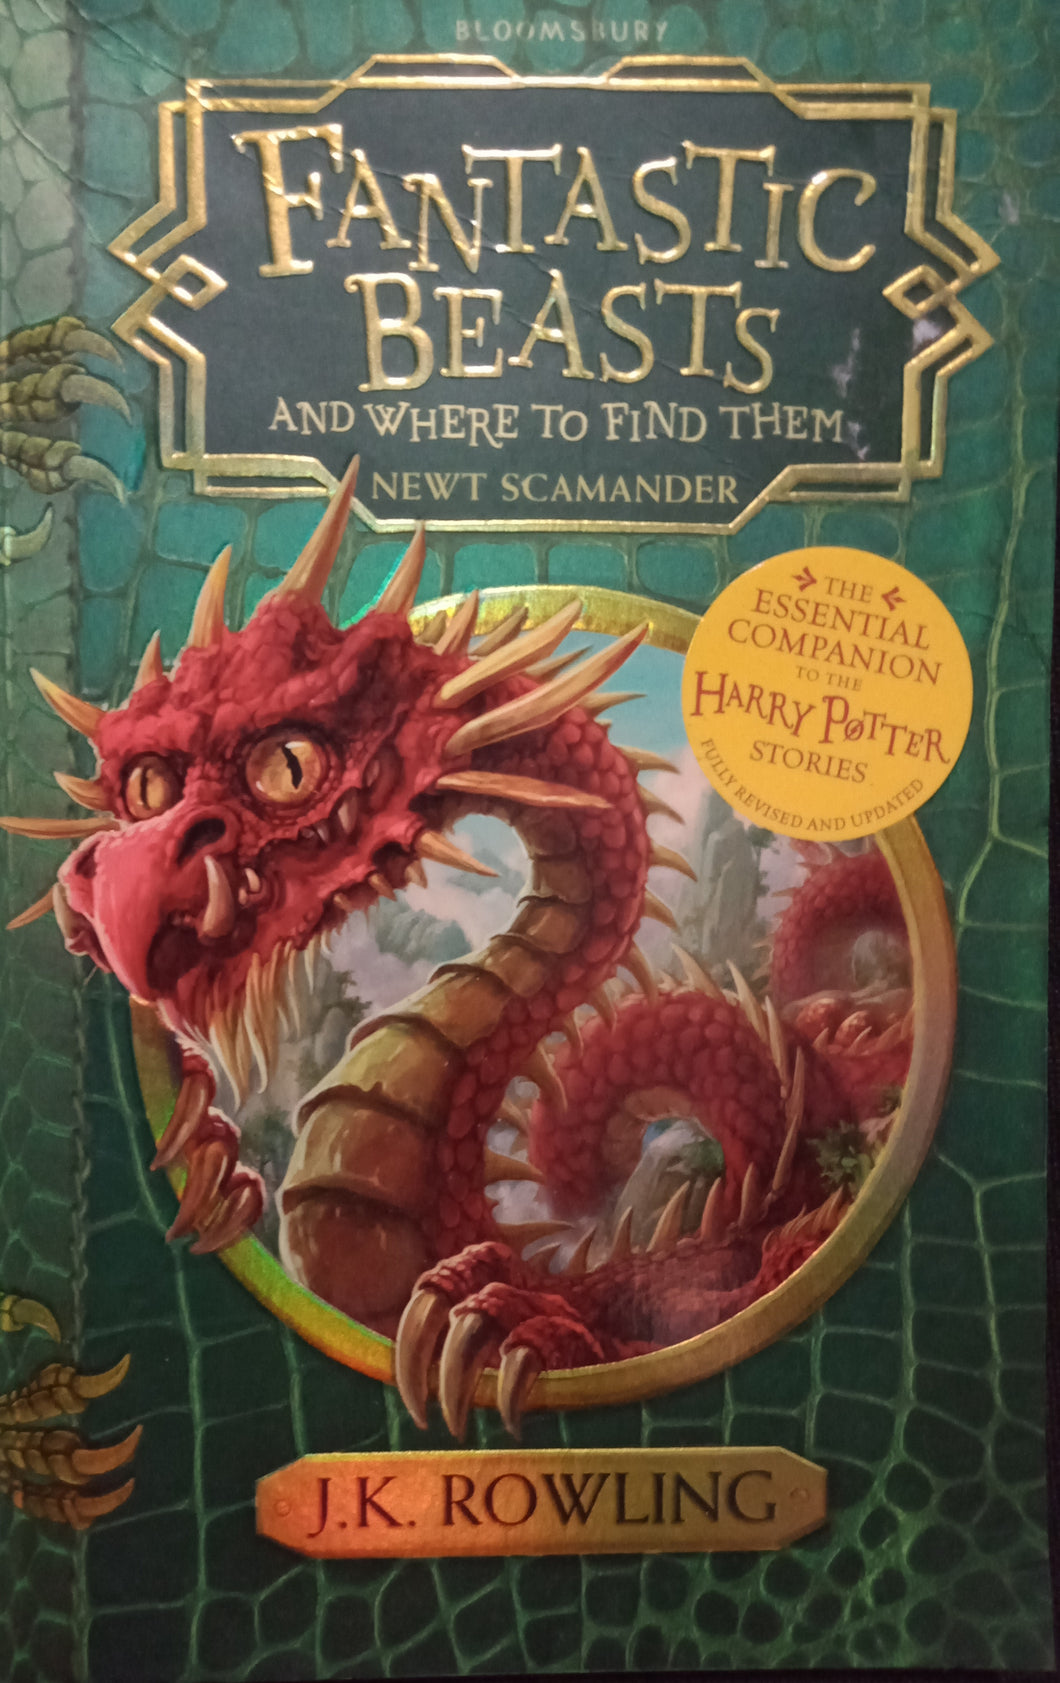 Fantastic Beasts and where to find them By J.K Rowling